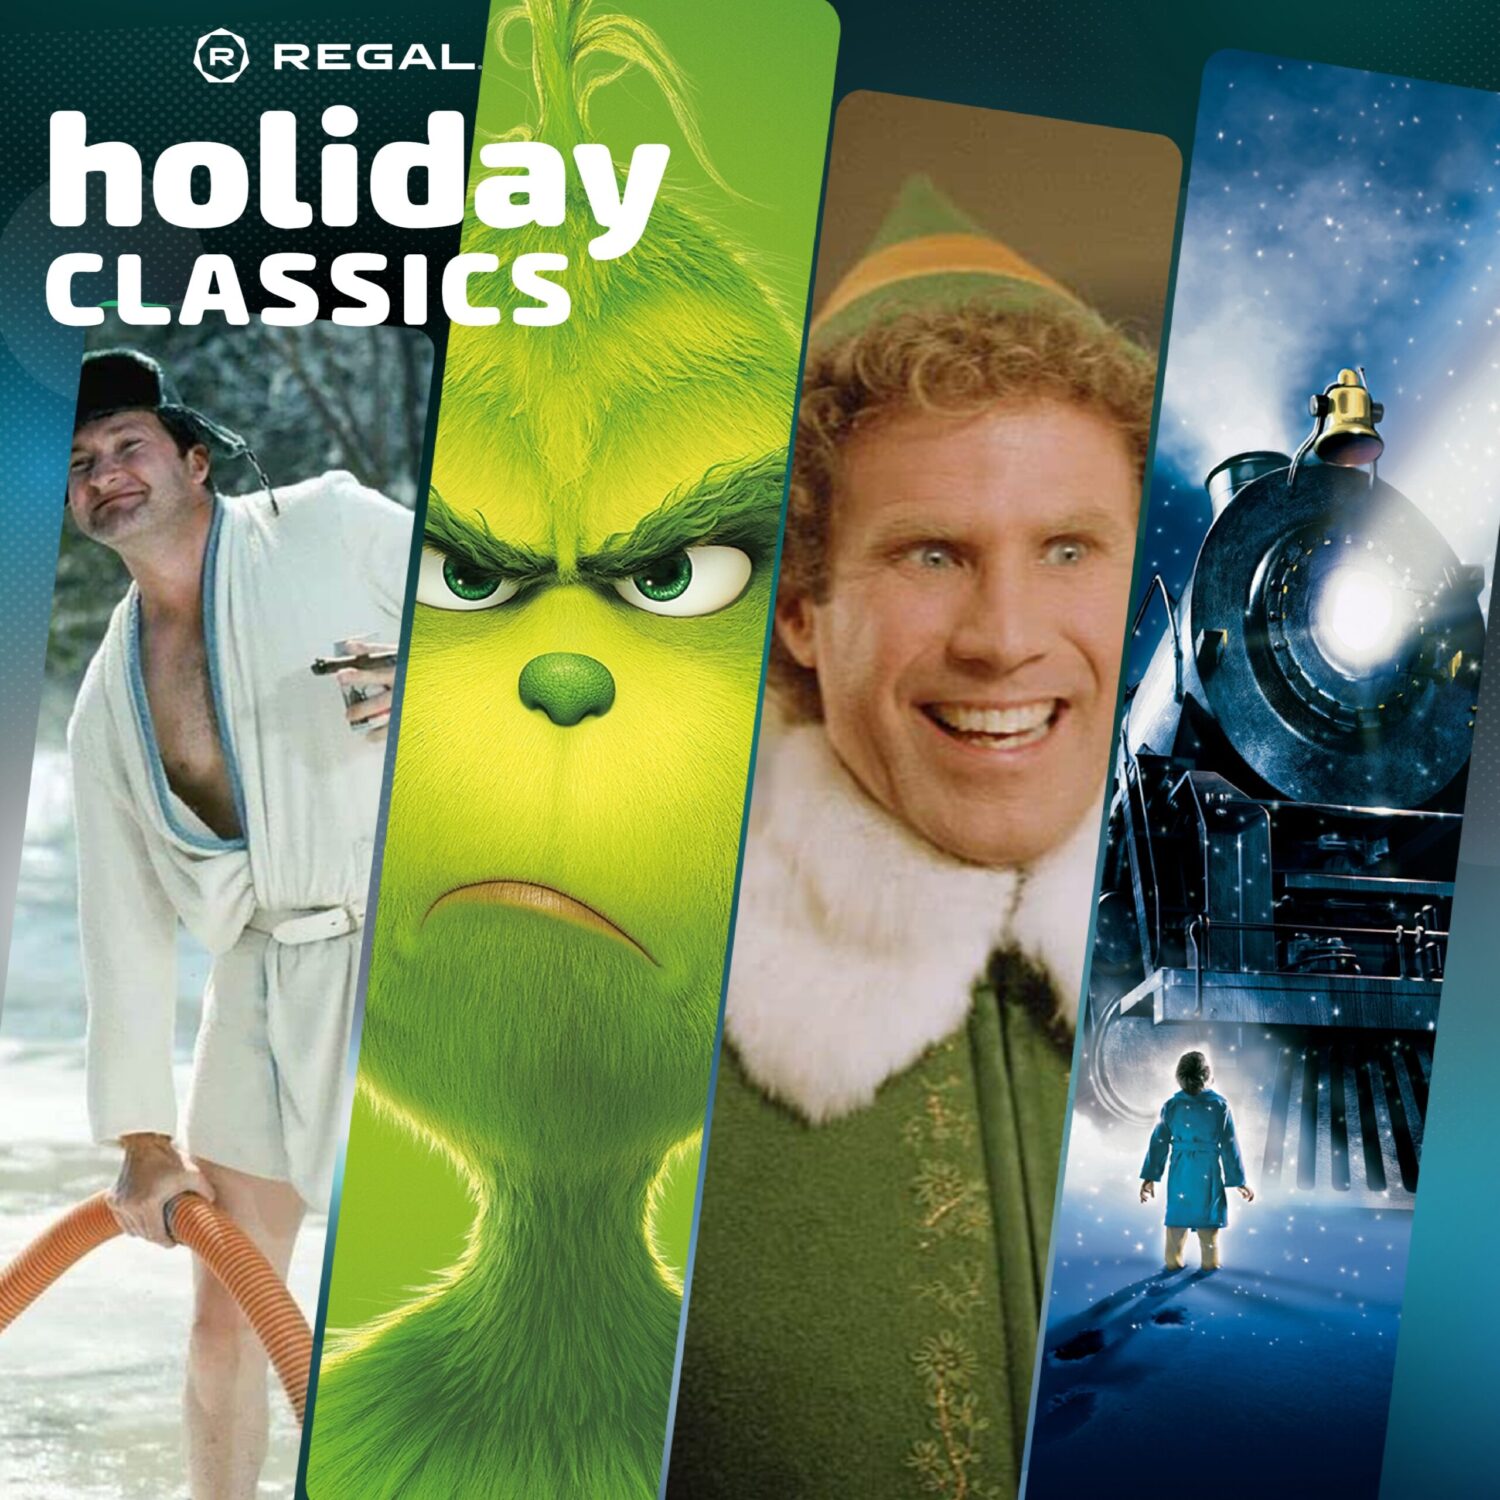 Regal Holiday Classics are coming to theaters near you. The next movie is Dec. 16.